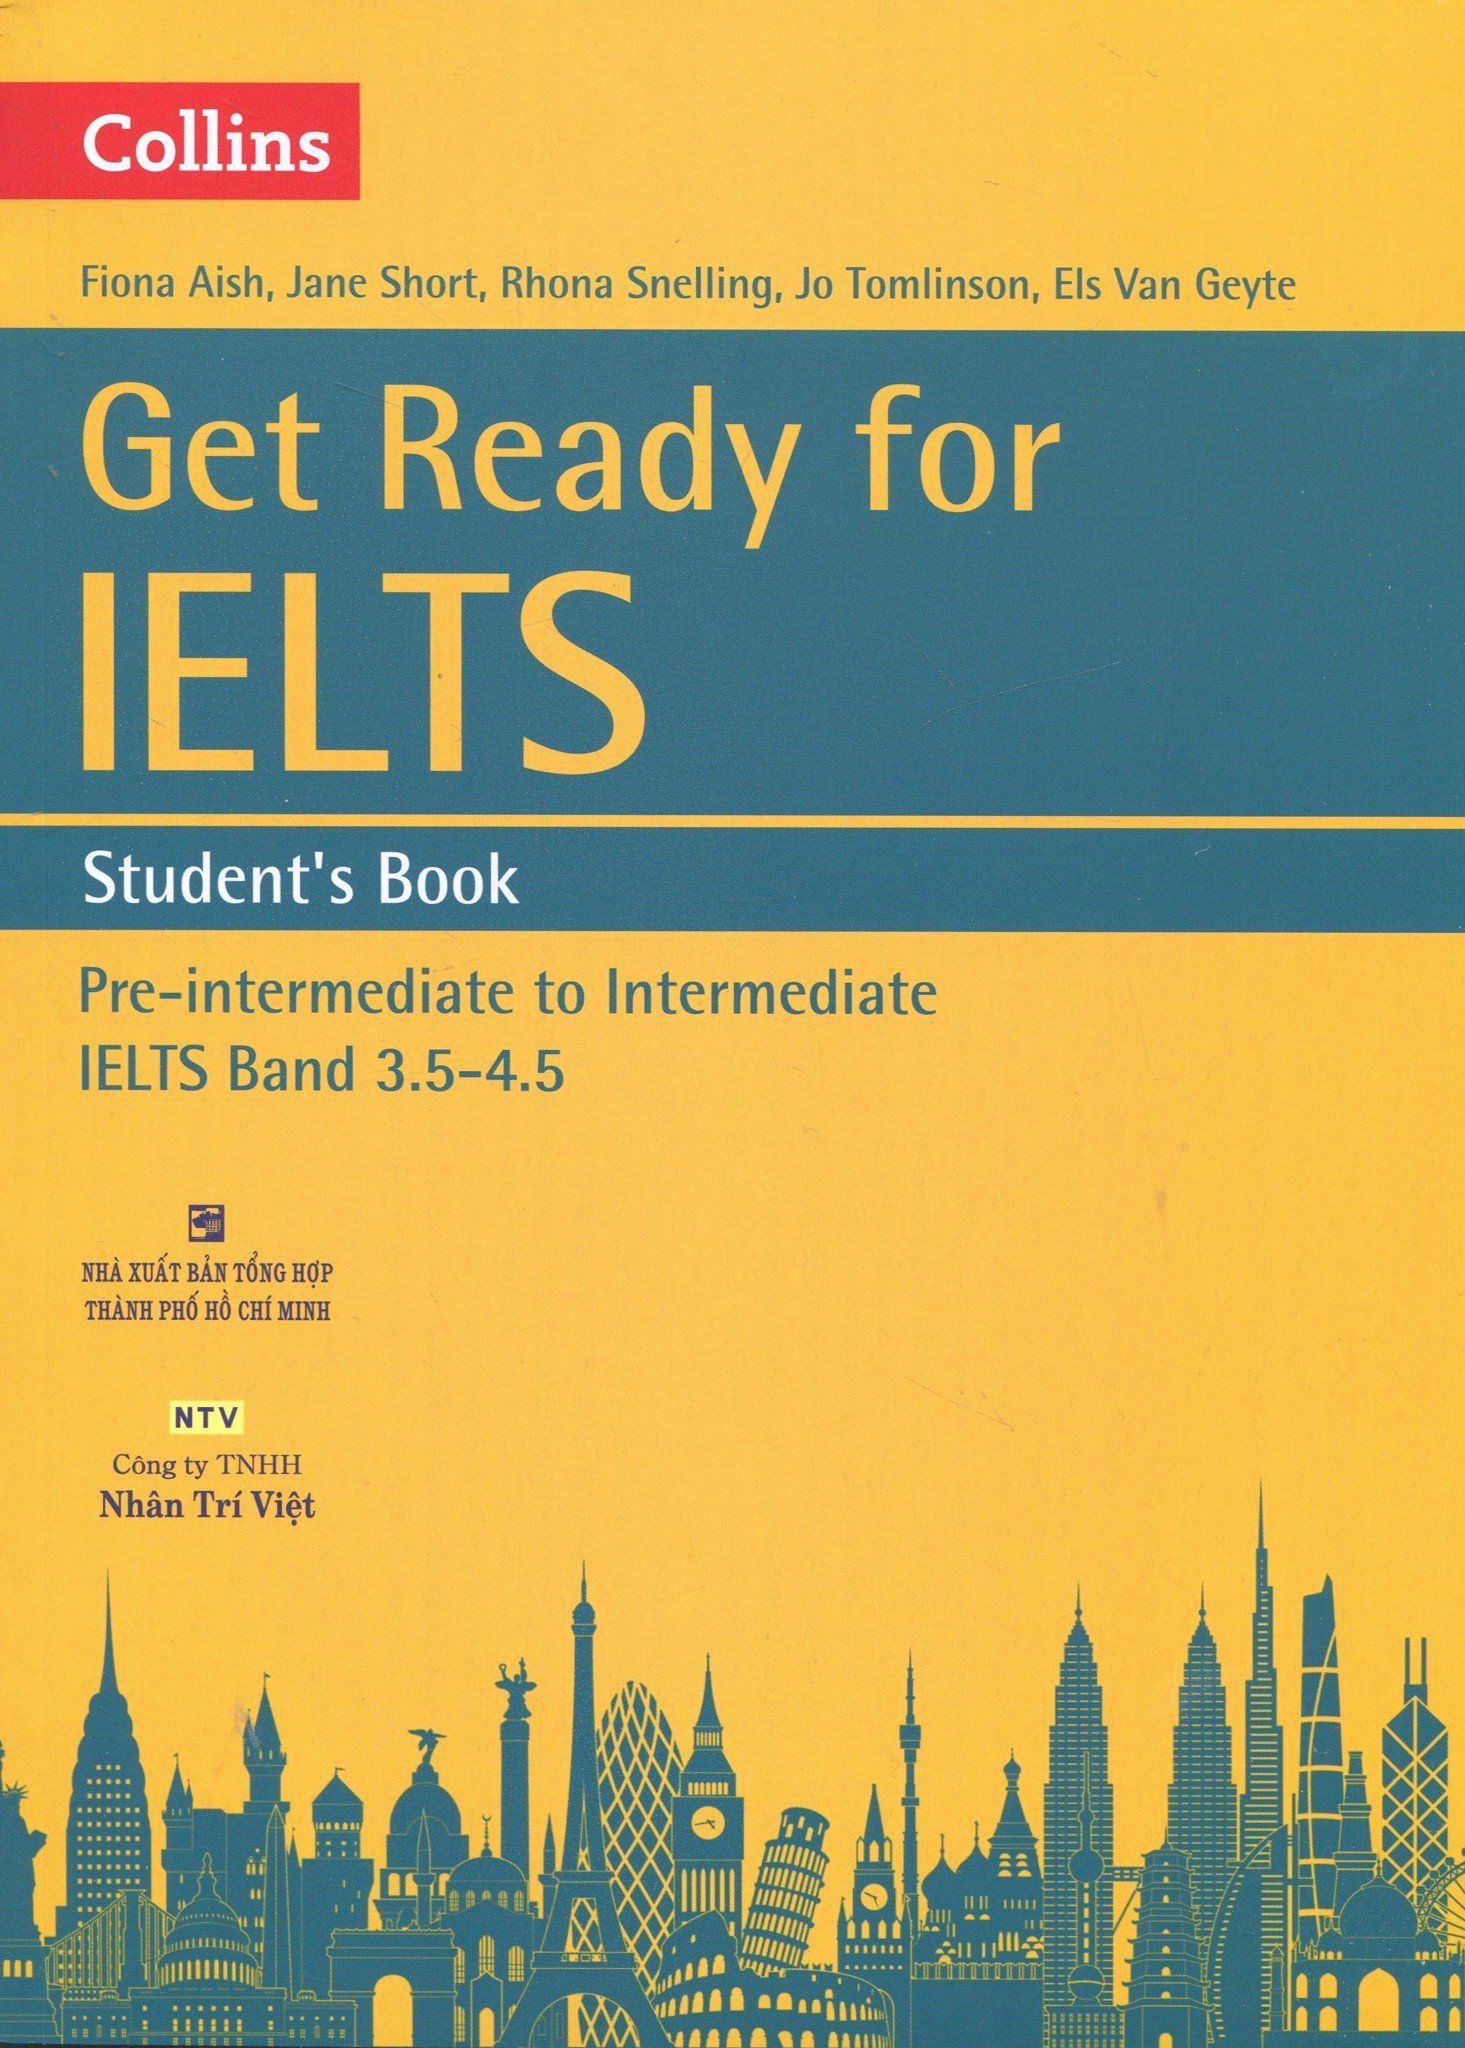  Collins - Get Ready For IELTS - Student's Book (Kèm 1 CD) 